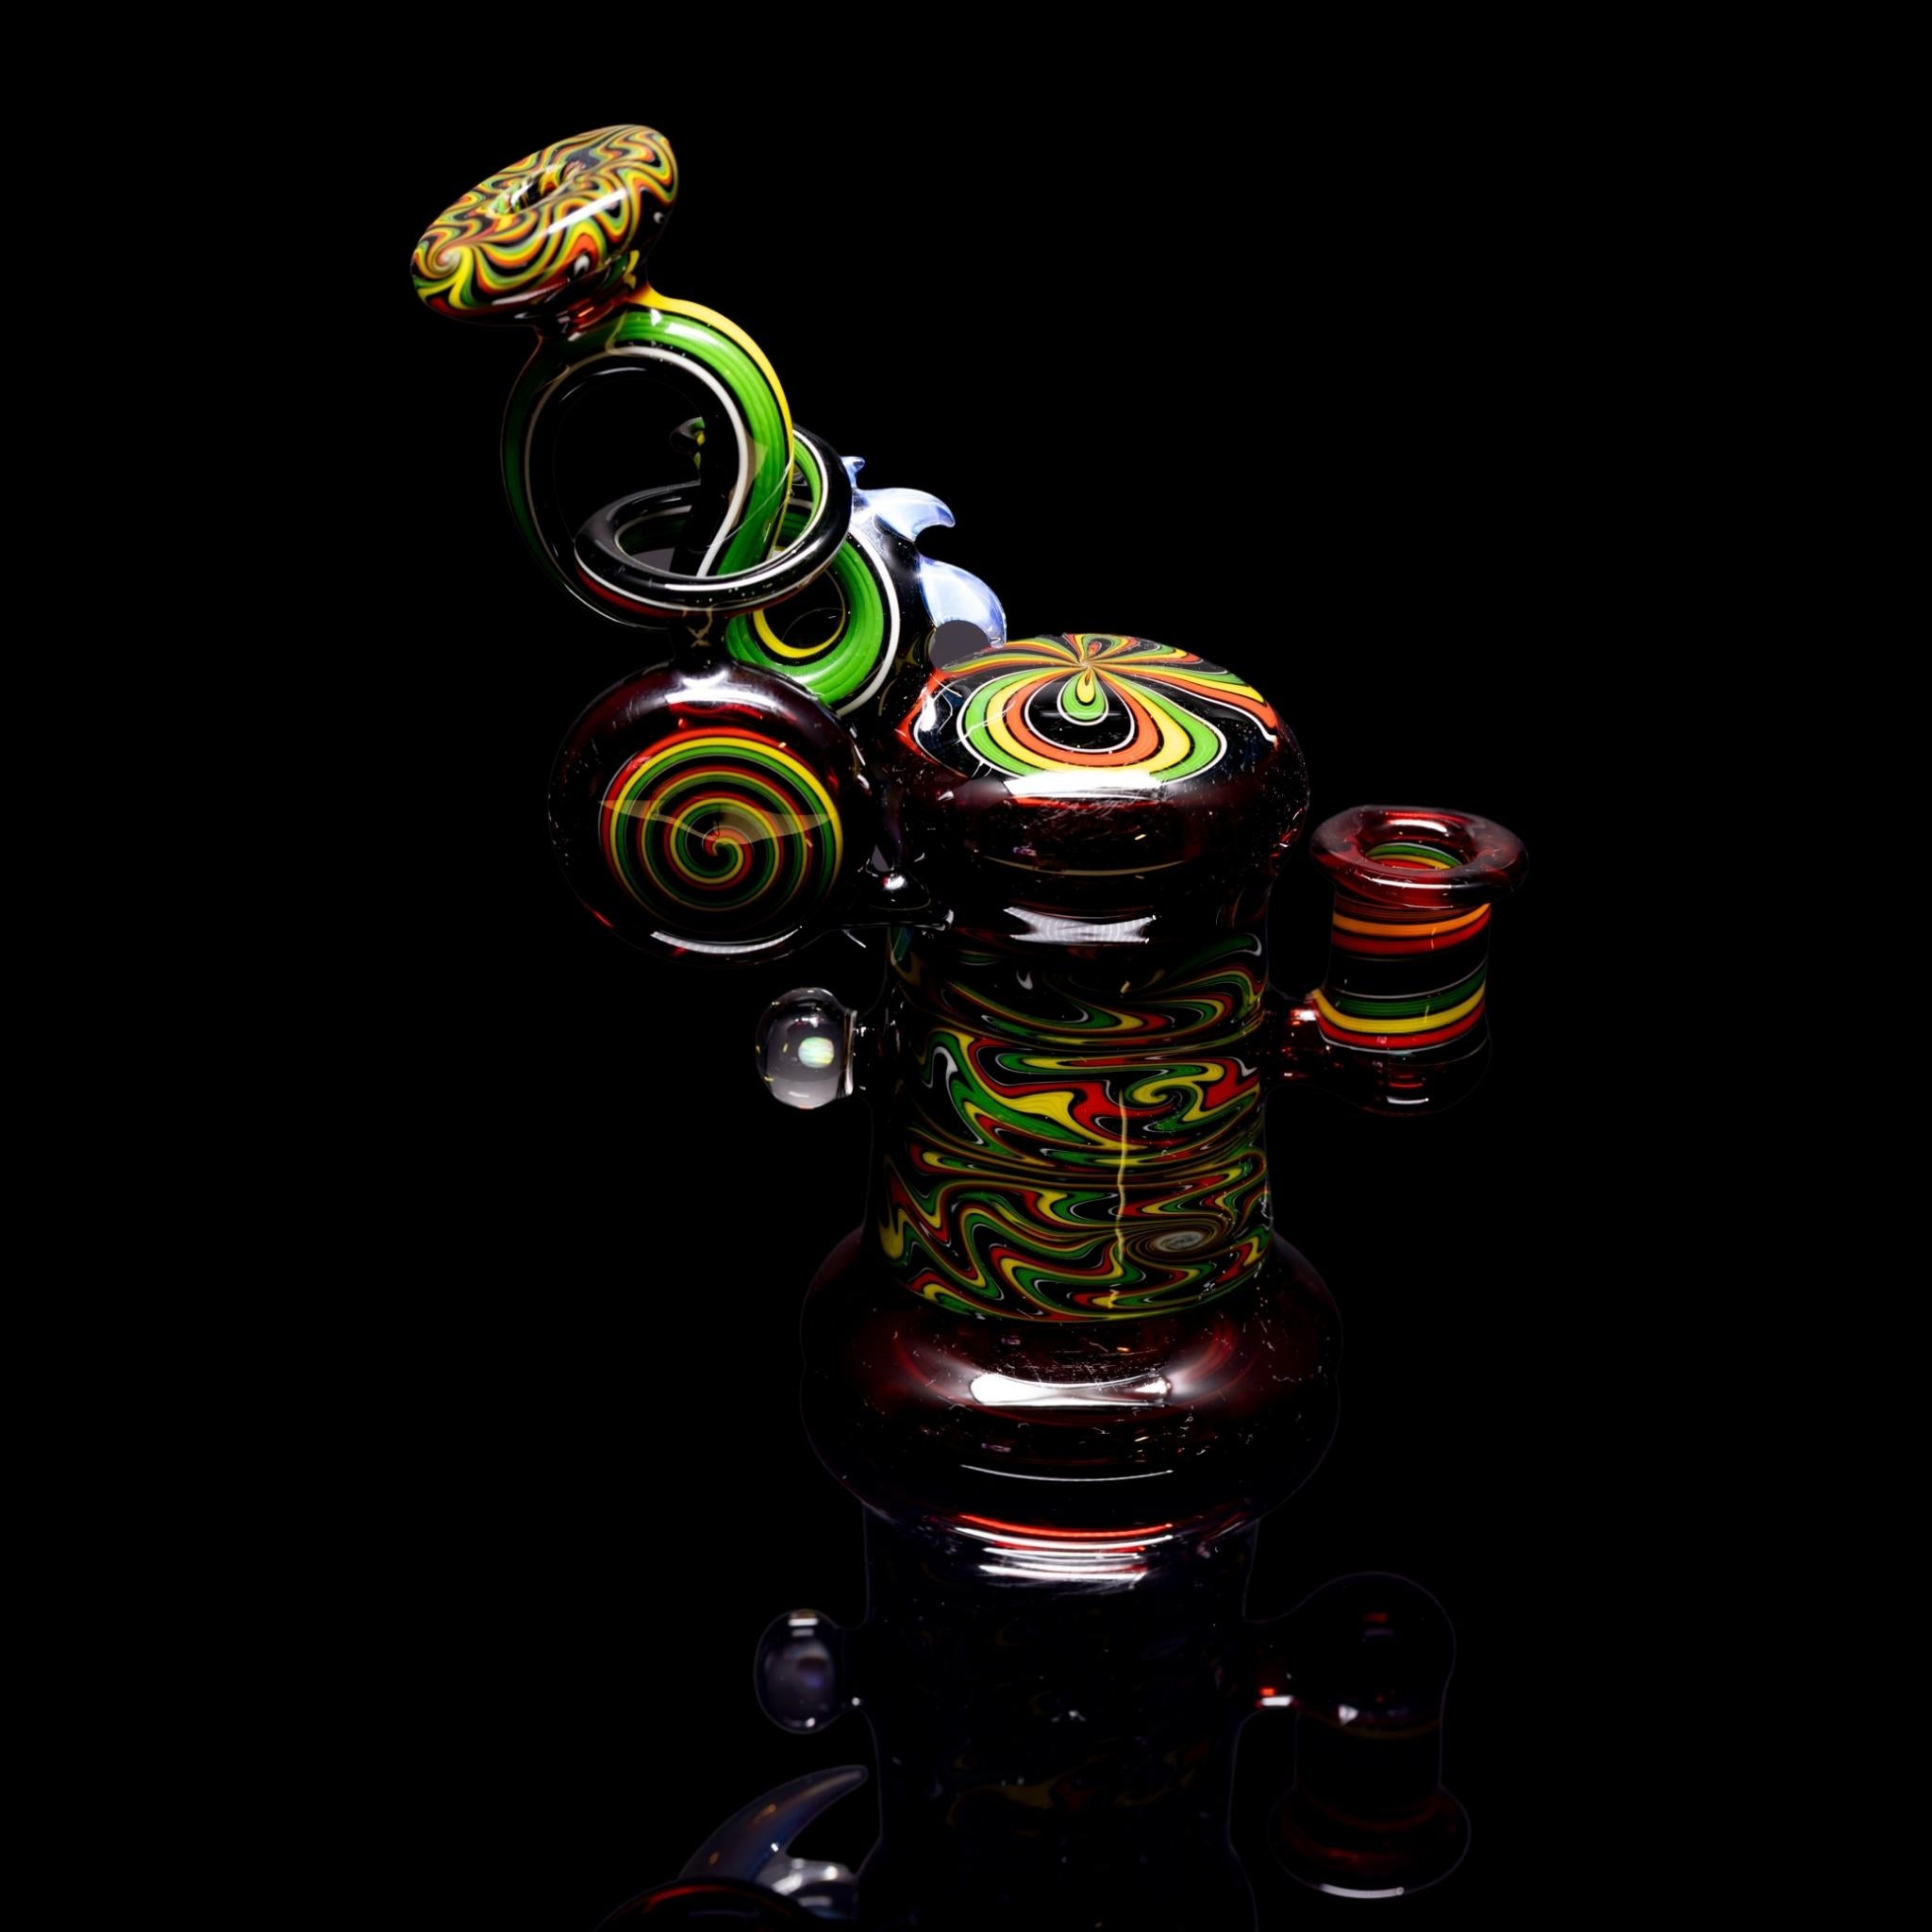 Pomegranate Paired with Rasta Galaxy Tubing